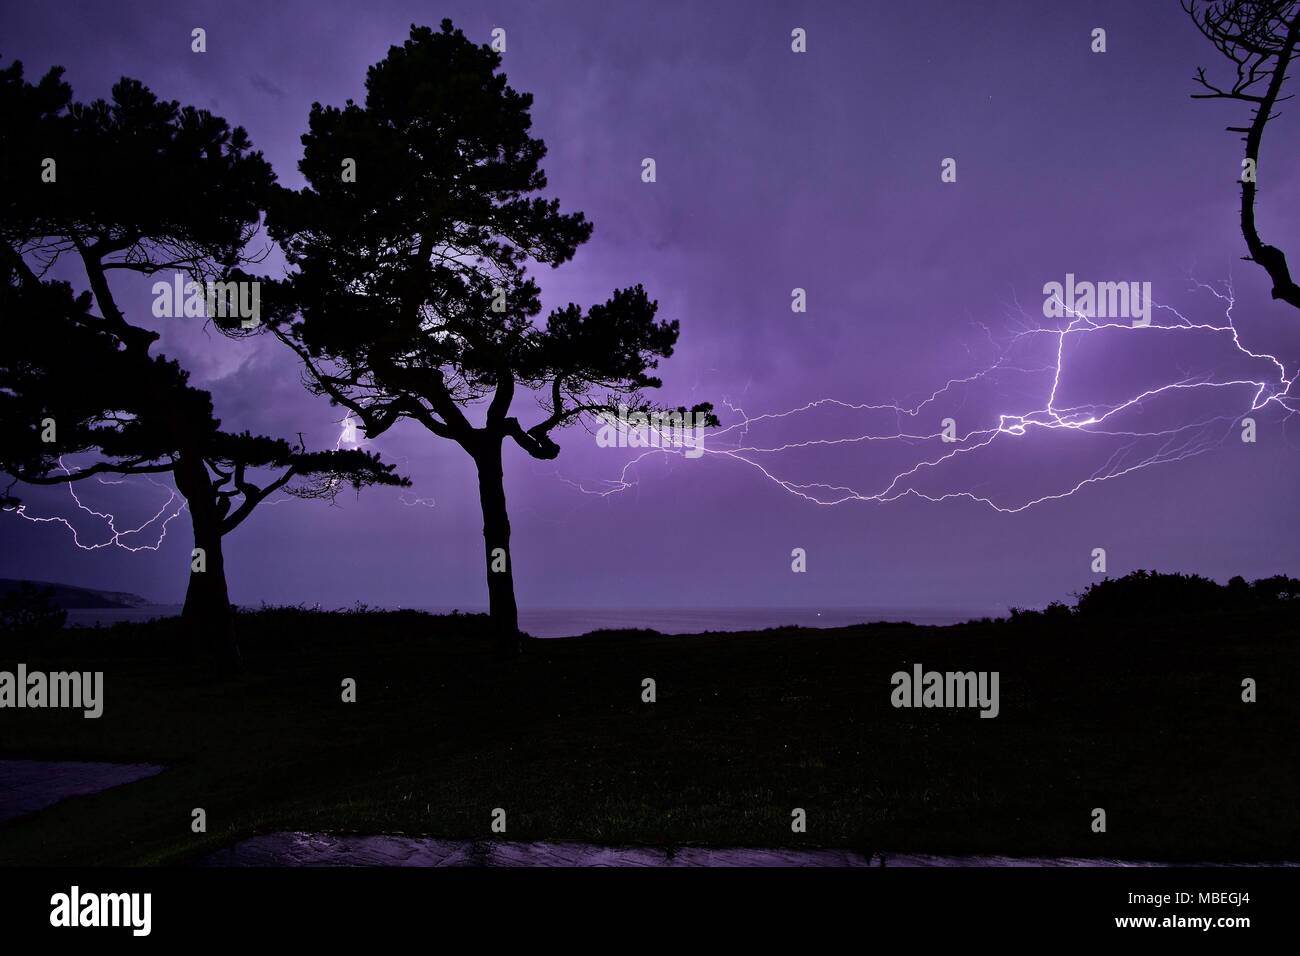 Thunderstorm with fork lighting at night over Colwell Bay, Isle of Wight with silhouettes of Scots Pine trees Stock Photo